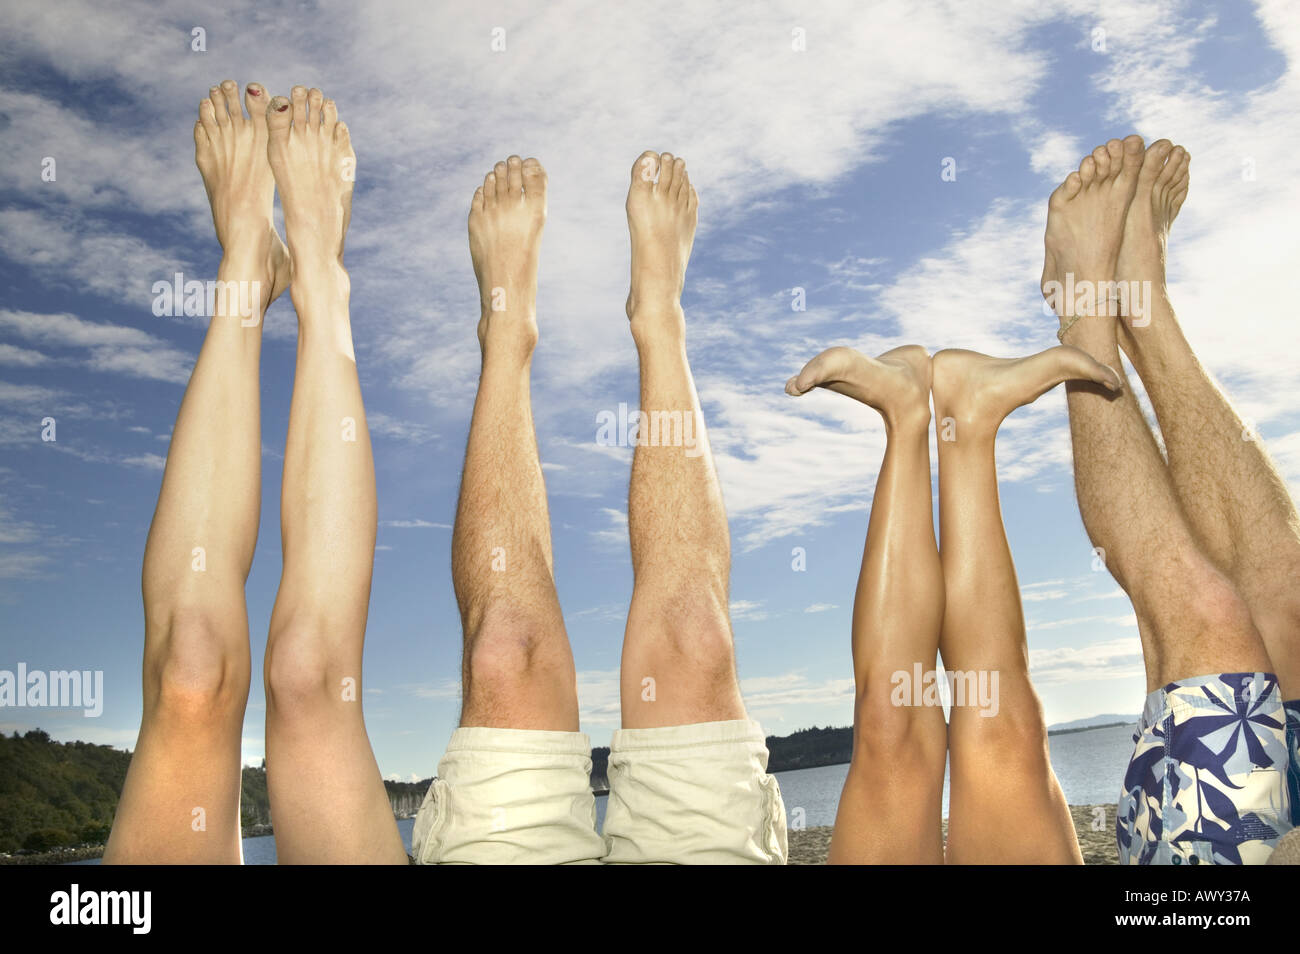 Legs and feet up in the air Stock Photo